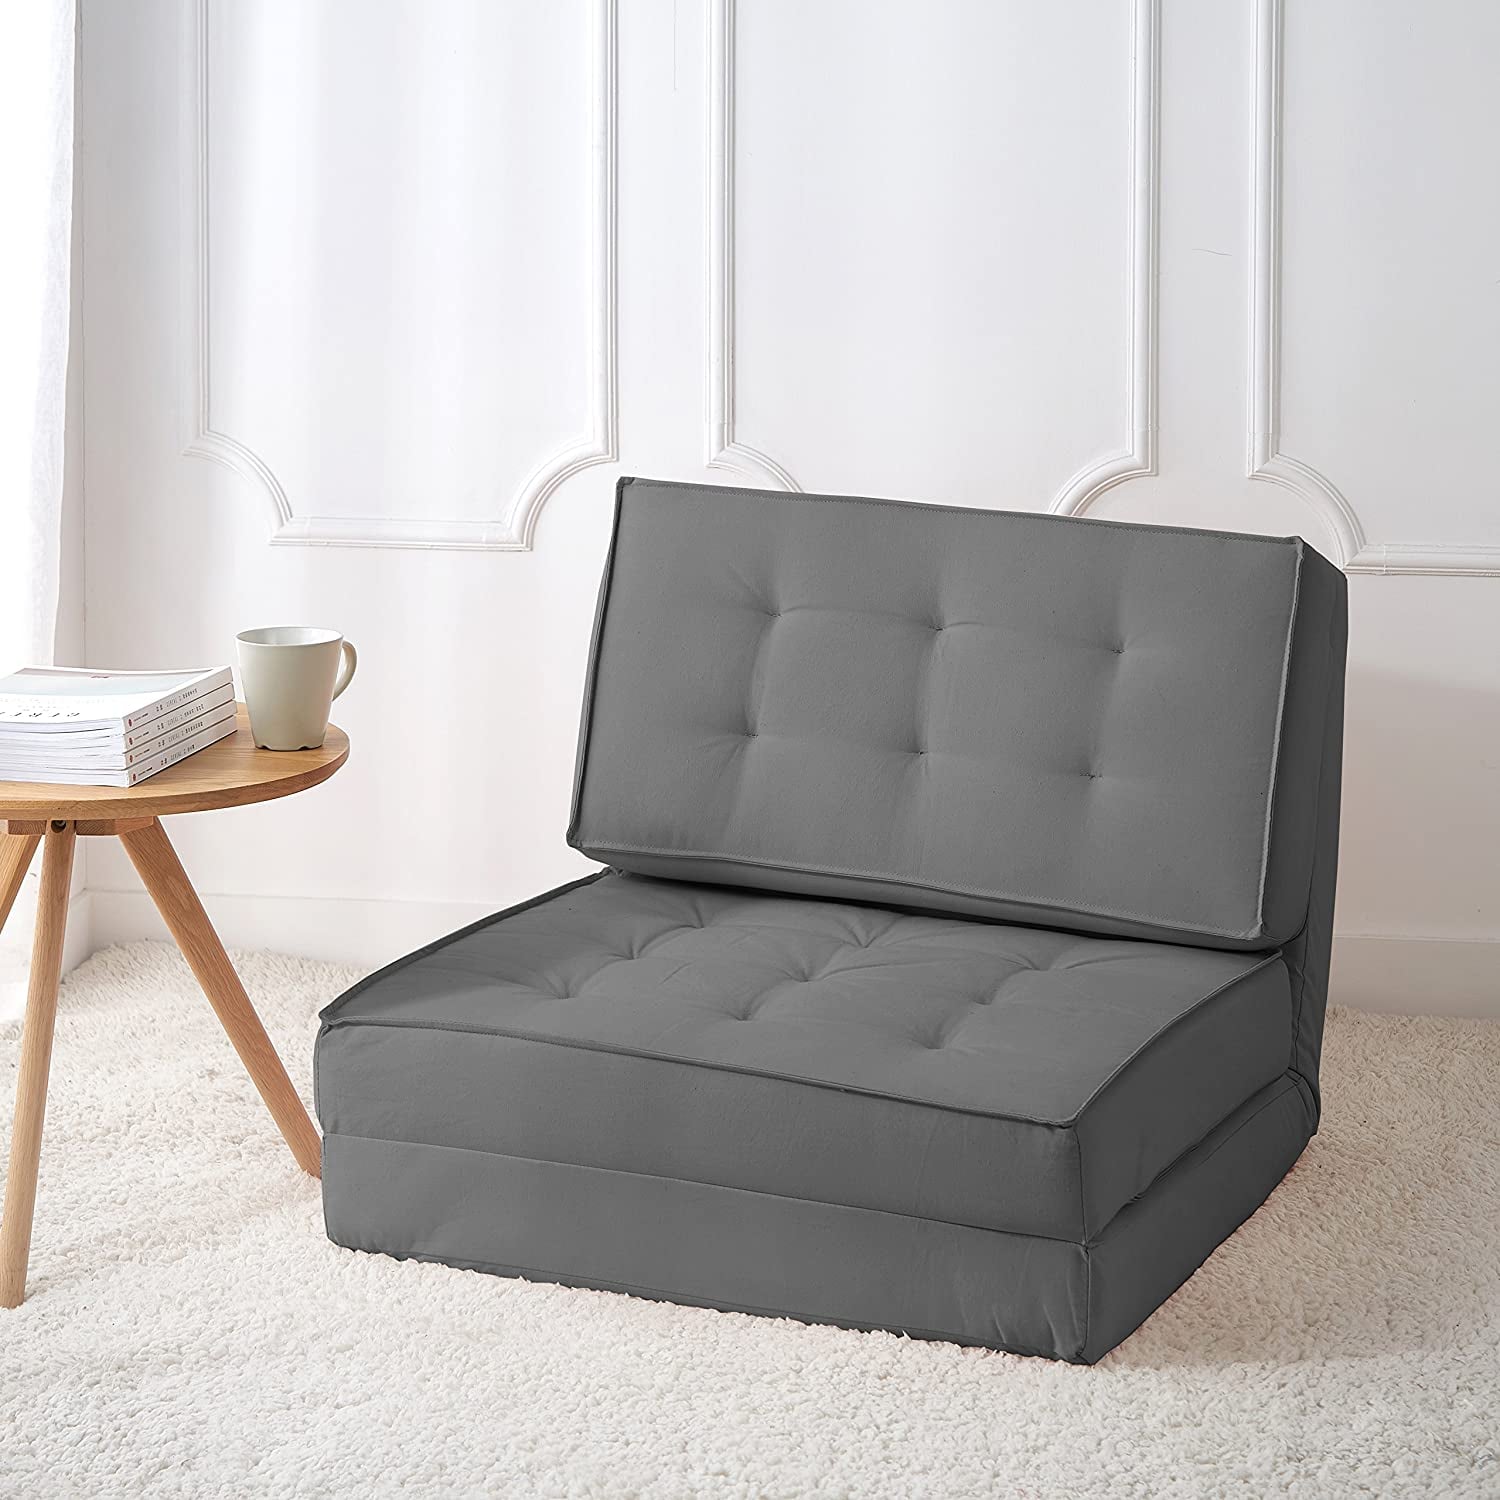  Chair That Turns Into Bed